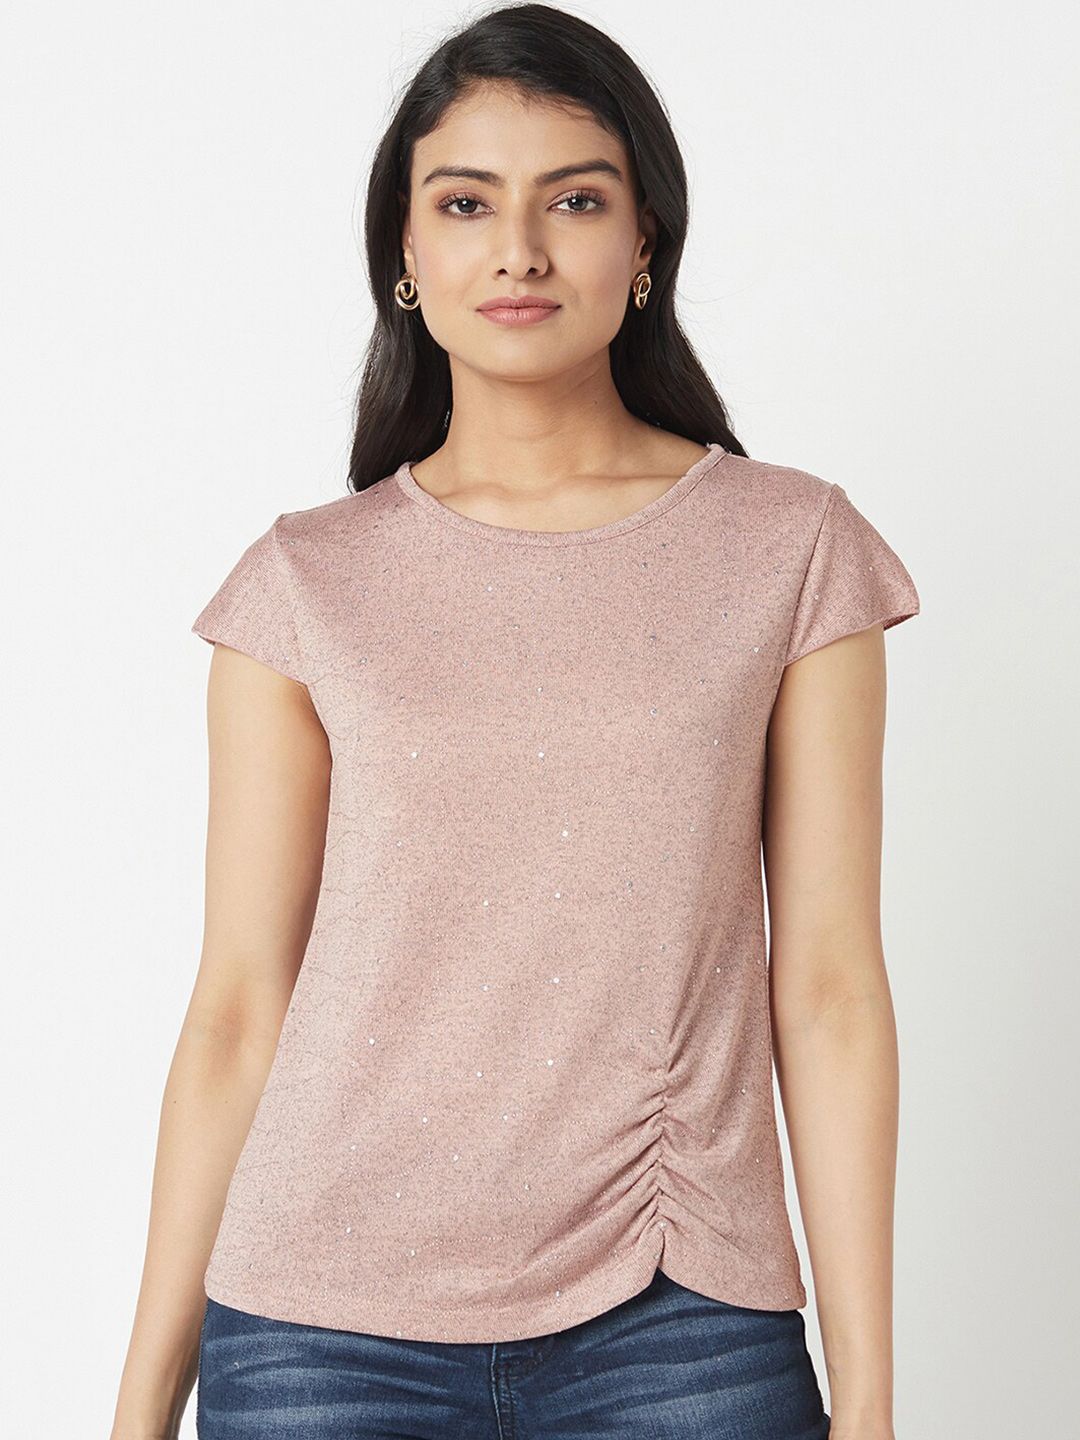 Miss Grace Pink Solid Top Price in India